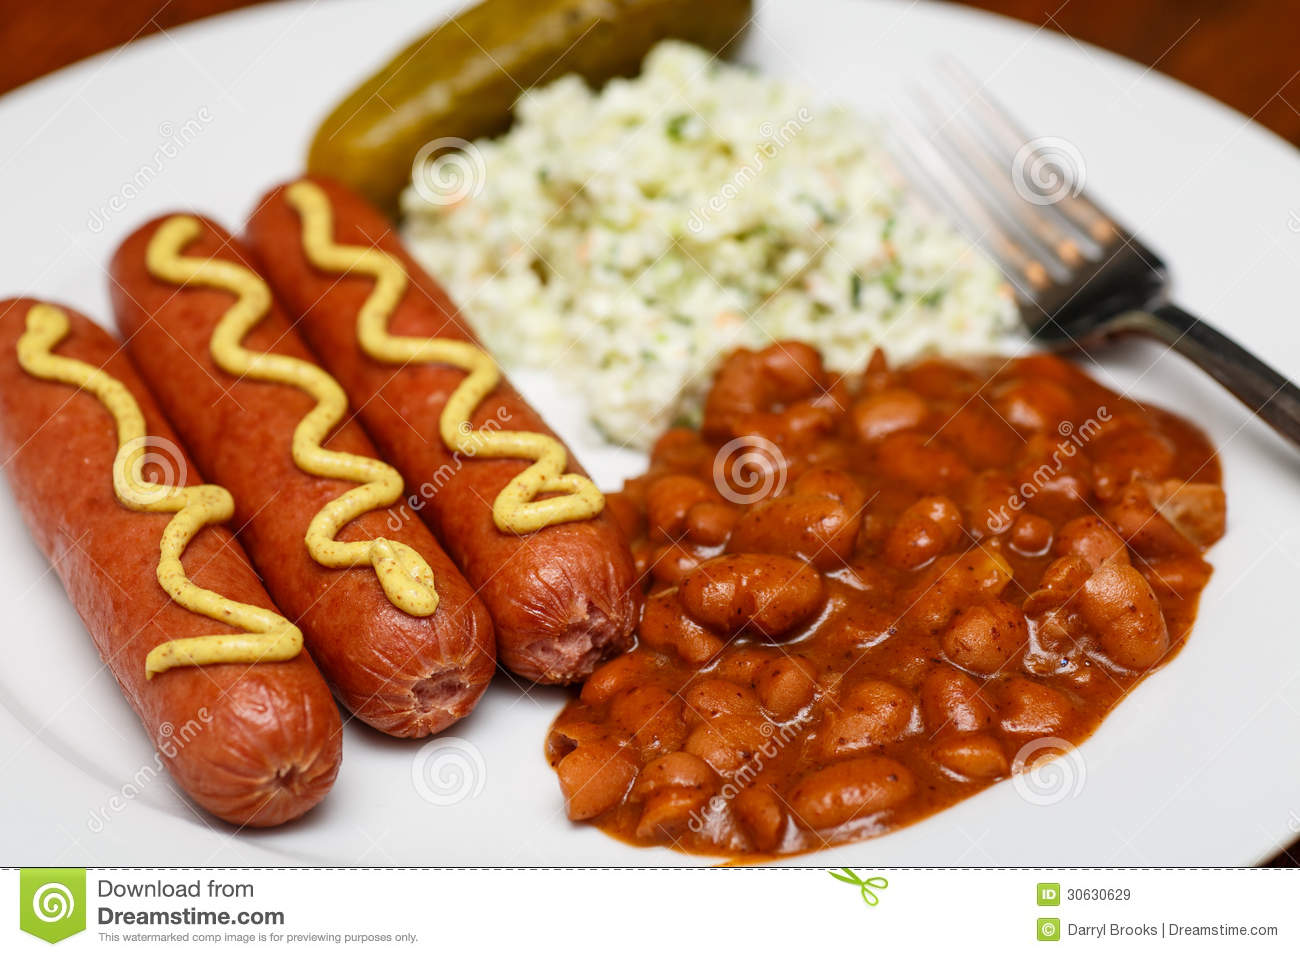 Fransk And Beans With Coleslaw And Pickle Royalty Free Stock Images